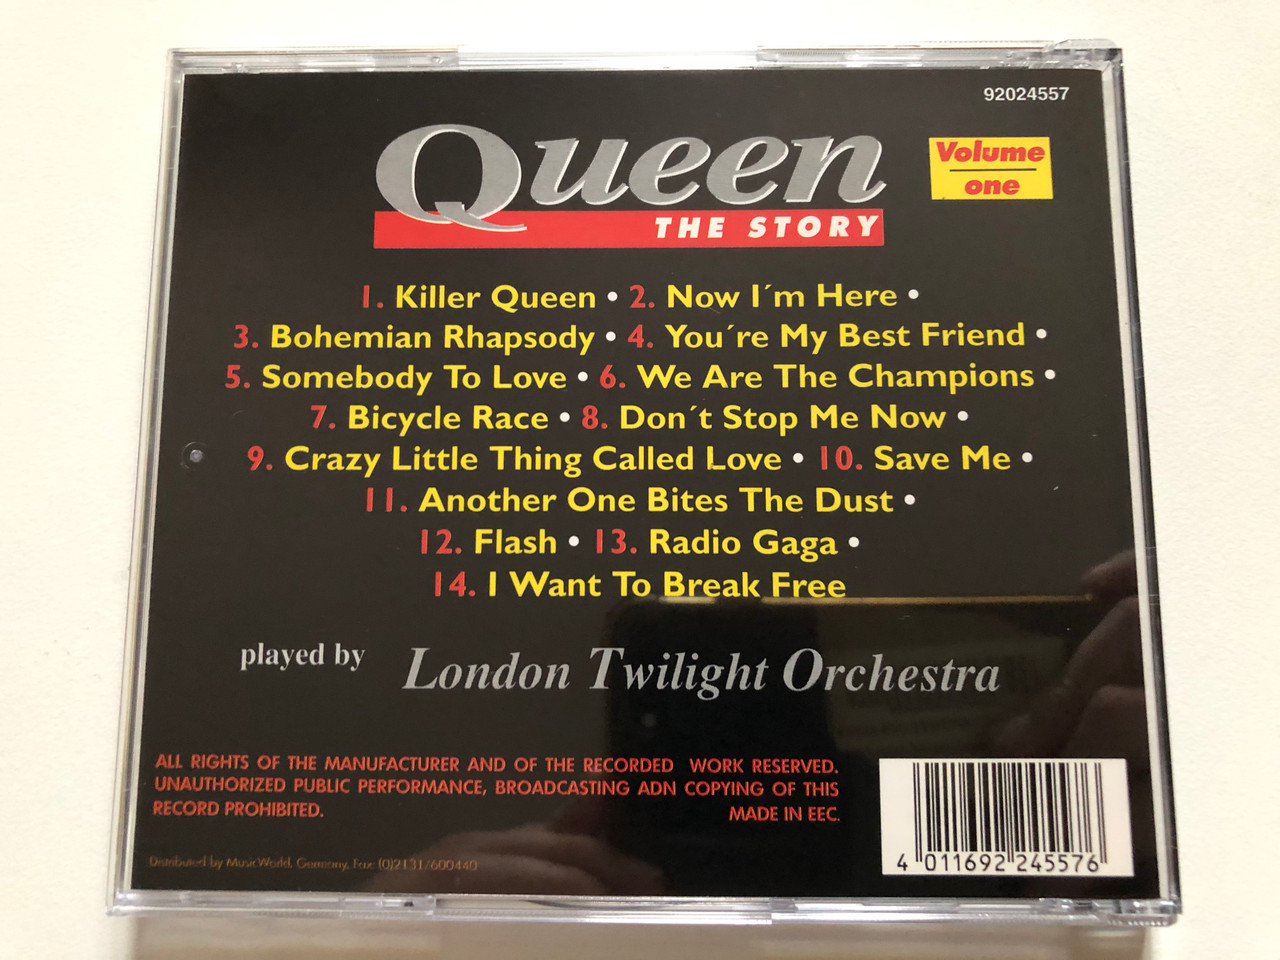 https://cdn10.bigcommerce.com/s-62bdpkt7pb/products/0/images/309925/Queen_-_The_Story_Volume_One_-_Played_By_London_Twilight_Orchestra_Magnum_Deluxe_Audio_CD_92024557_3__77737.1699298448.1280.1280.JPG?c=2